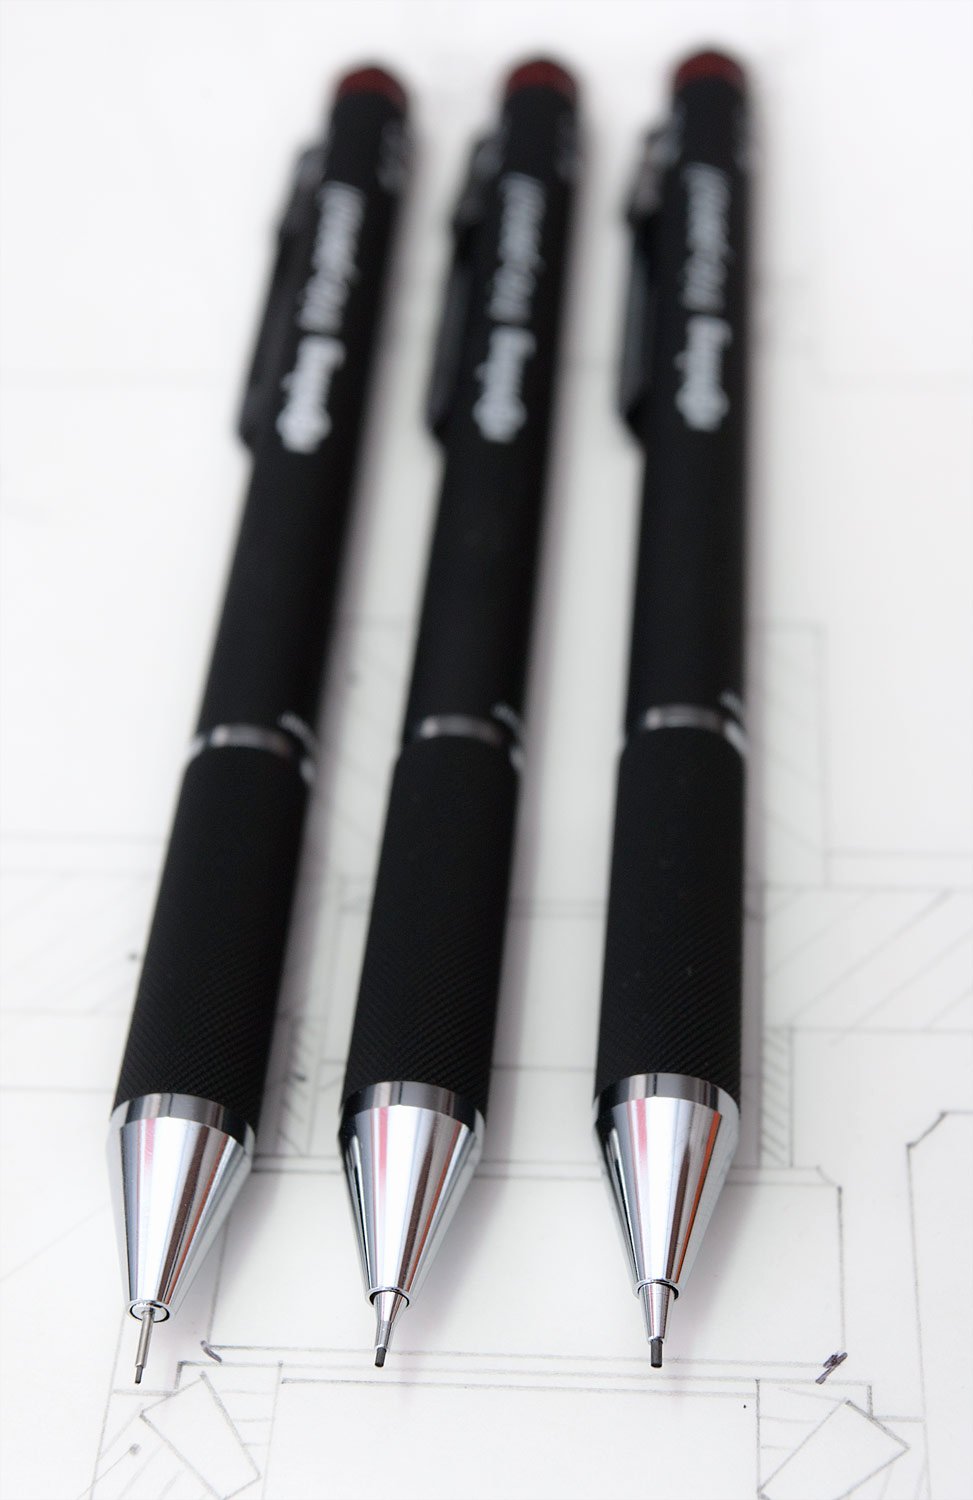 A Picture Of A Pencil Awesome Rotring Trio Pencil